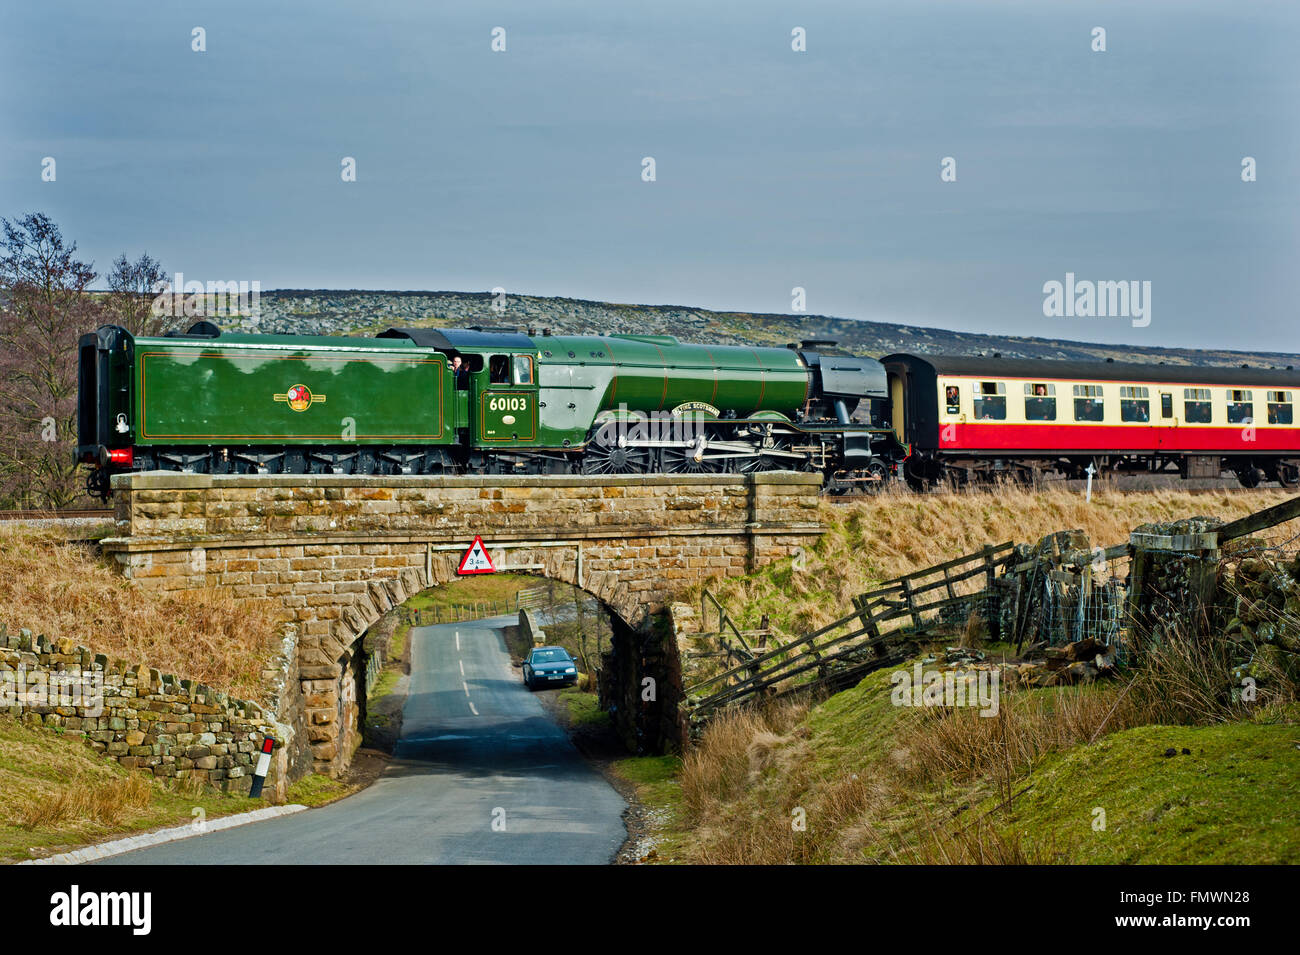 A3 Pacific No 60103 Flying Scotsman at Moorgates, North Yorkshire Moors Railway with a train from Pickering to Grosmont Stock Photo